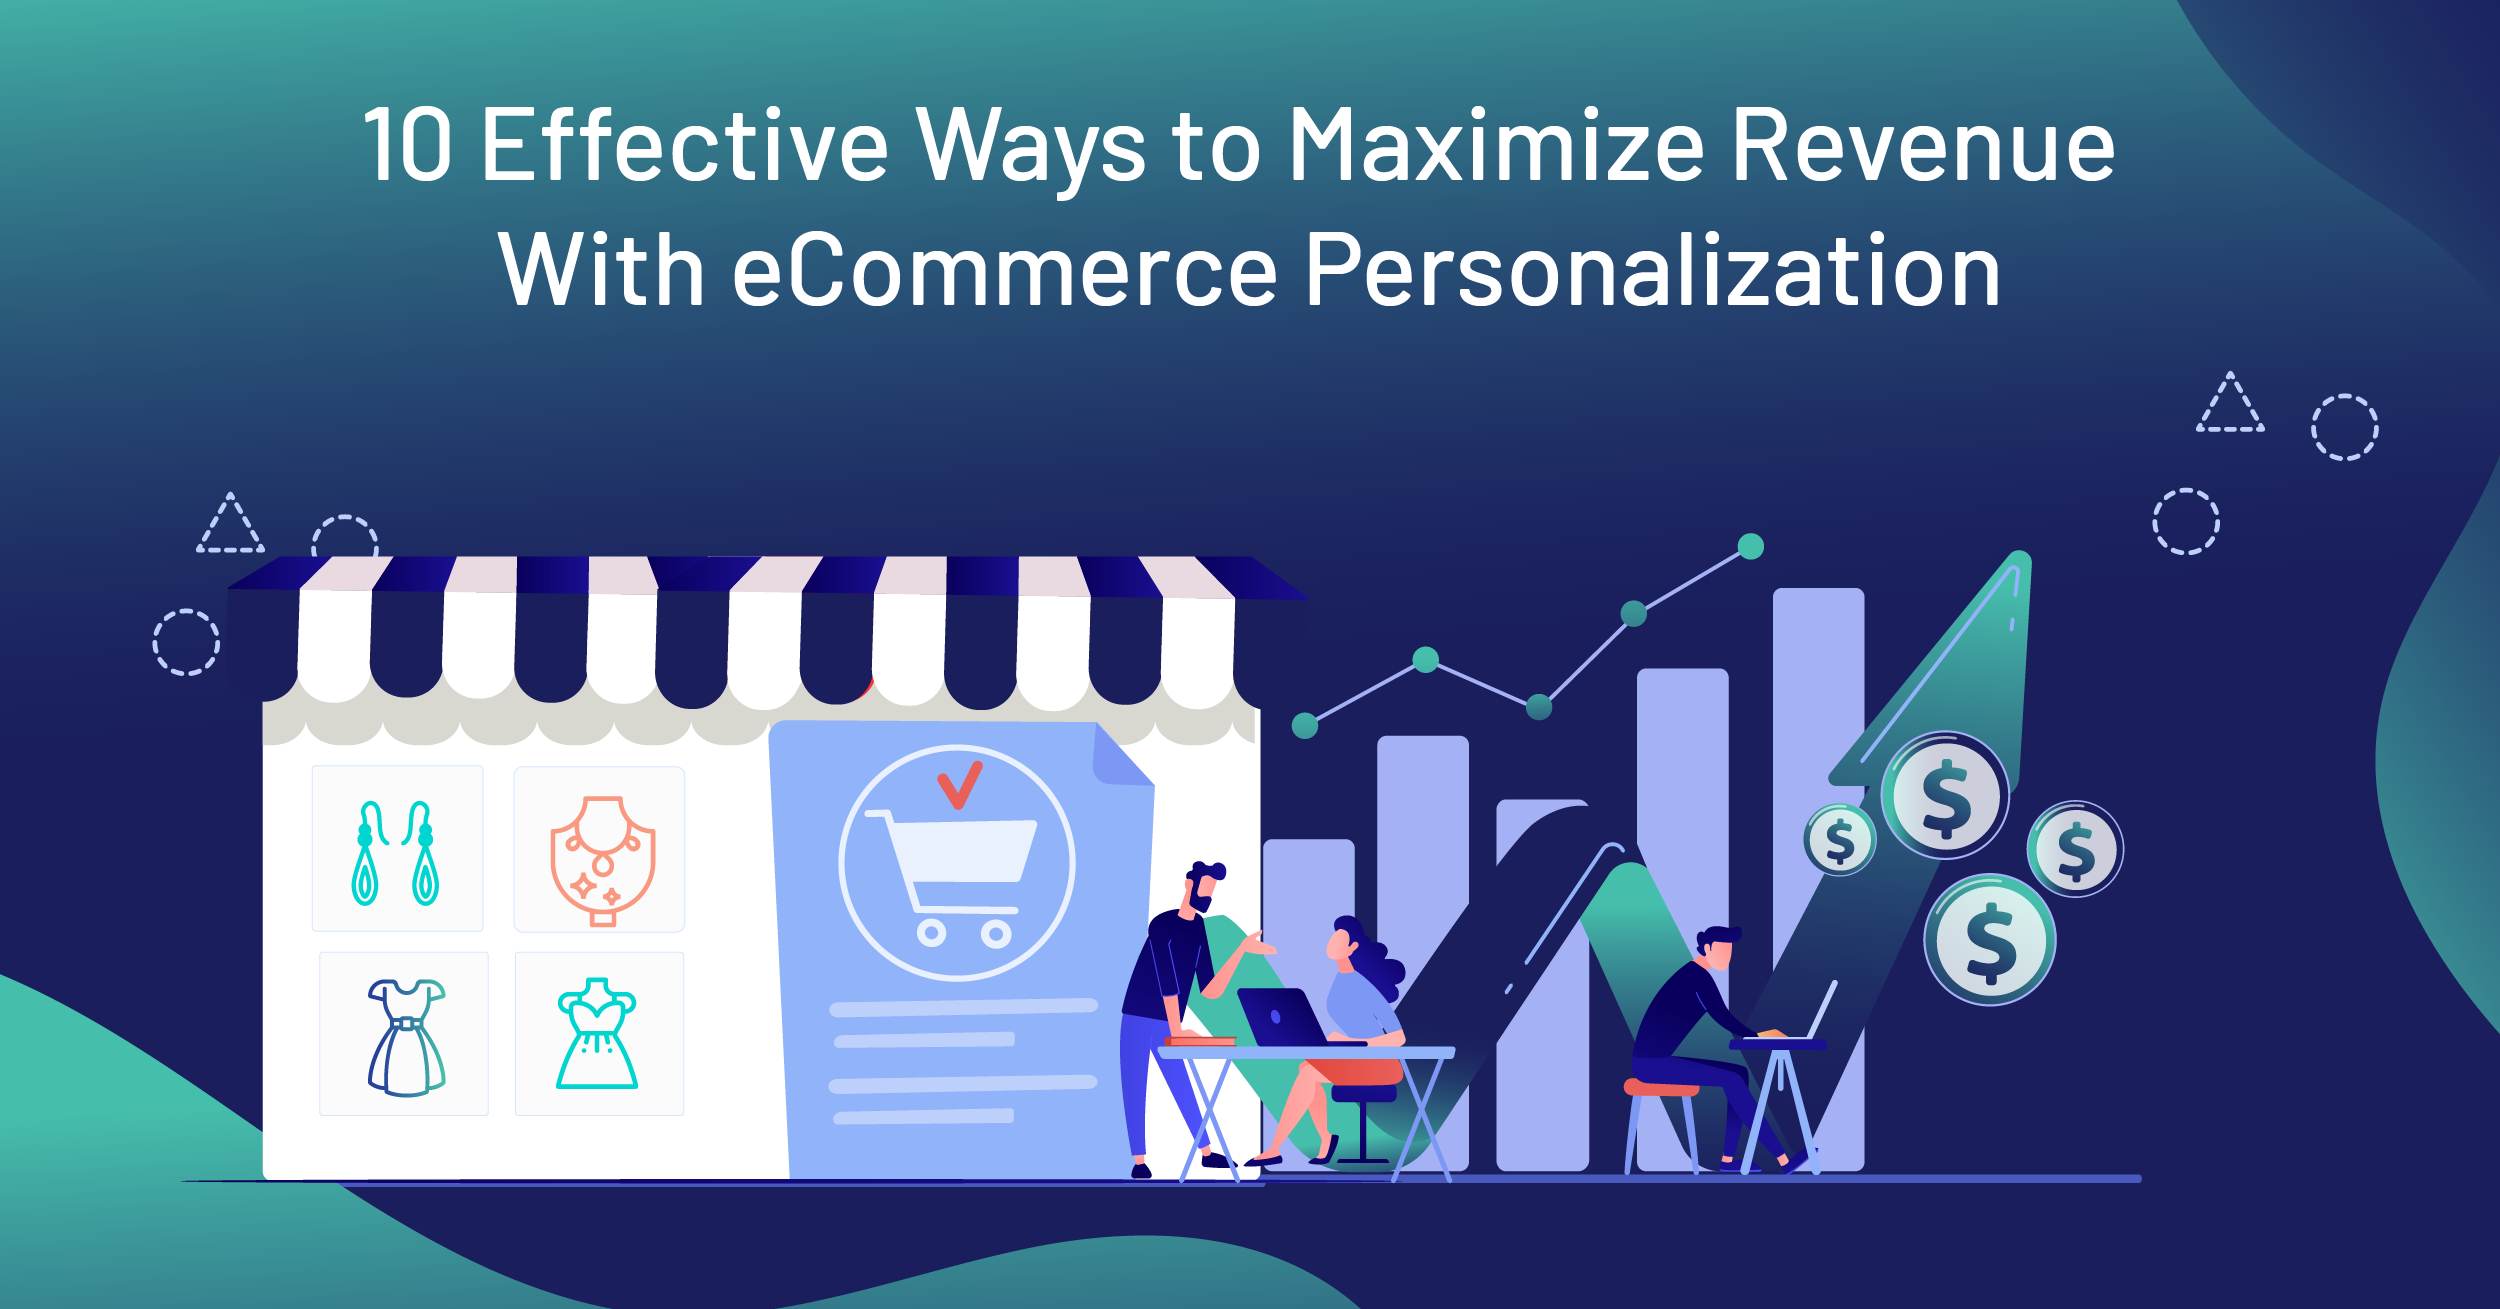 10 Effective Ways to Maximize Revenue With eCommerce Personalization